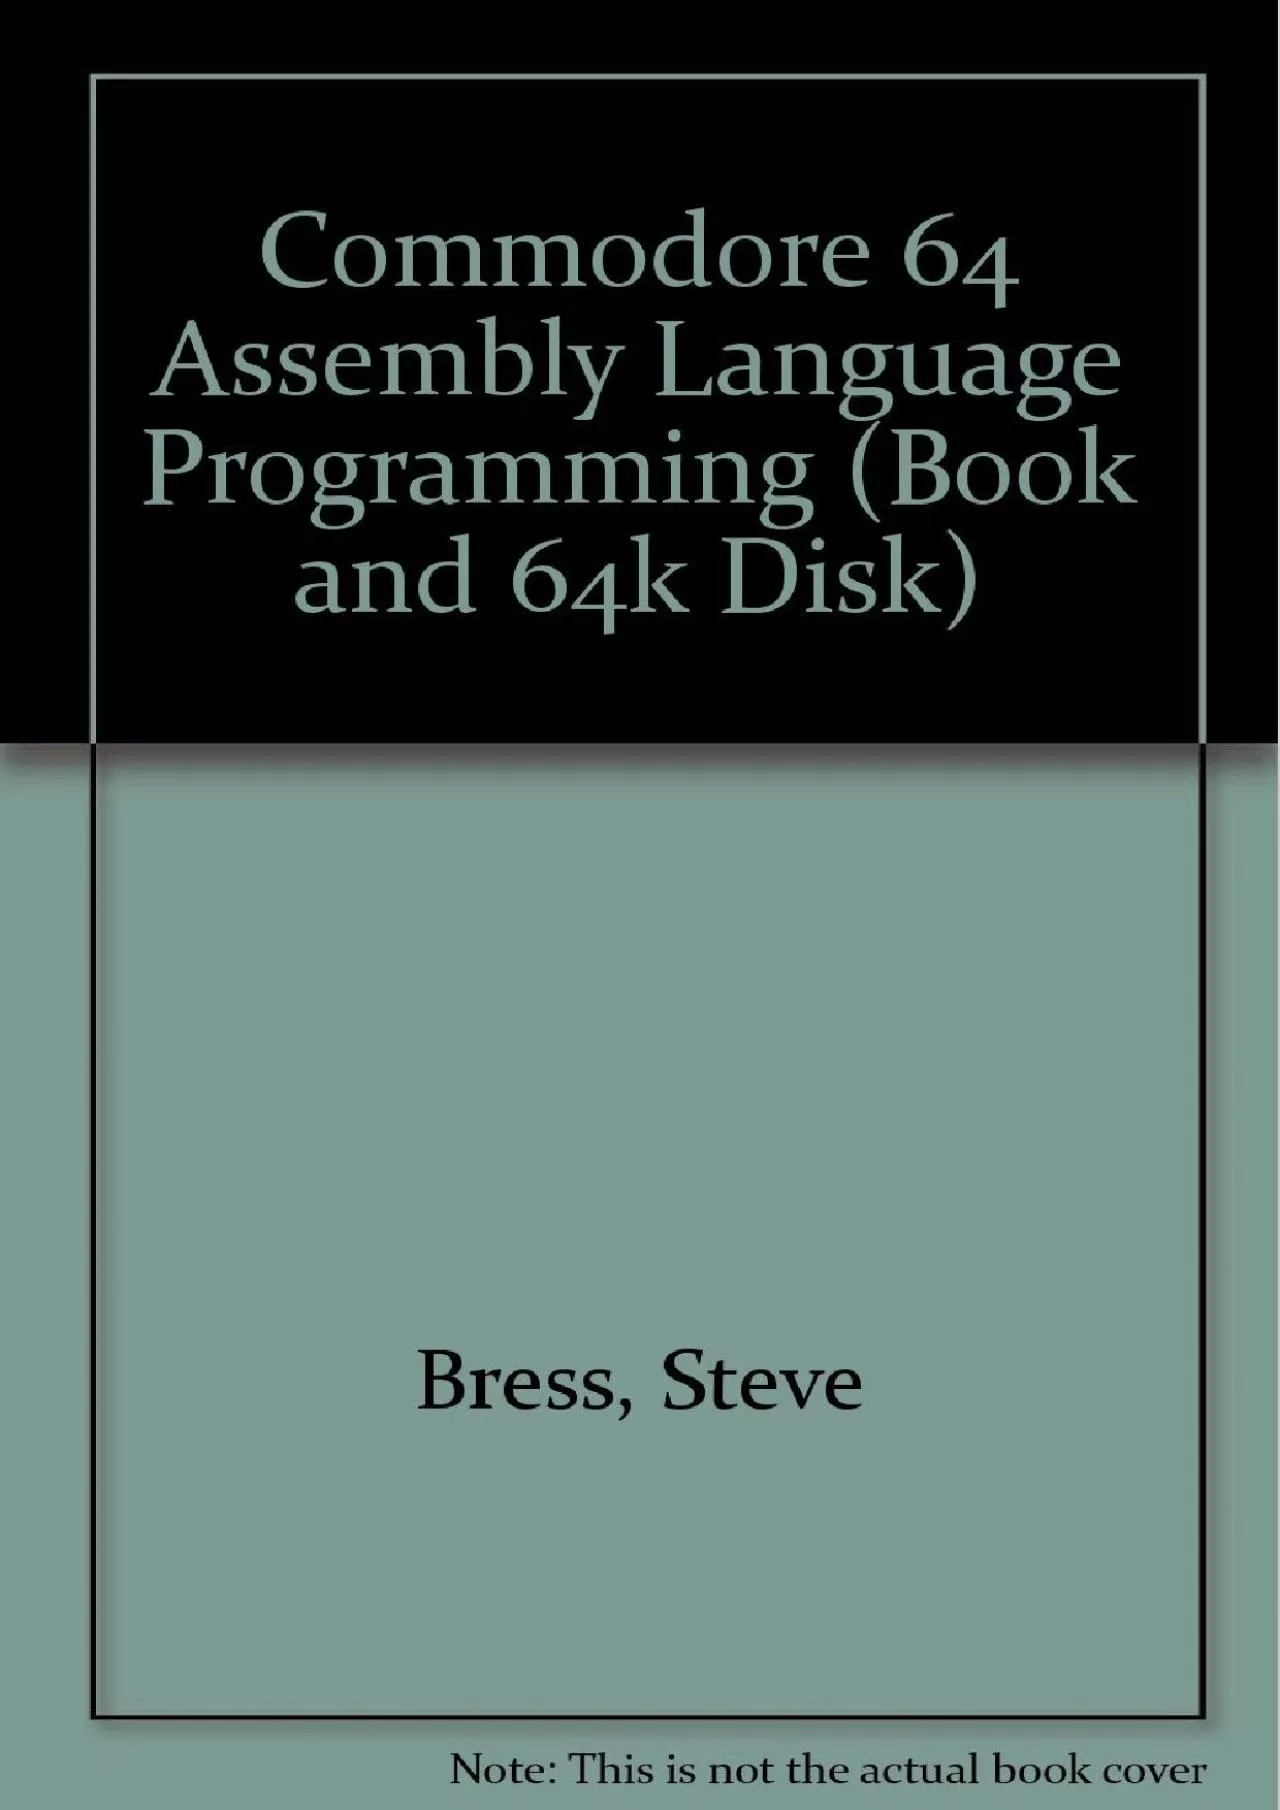 [eBOOK]-Commodore 64 Assembly Language Programming (Book and 64K Disk)